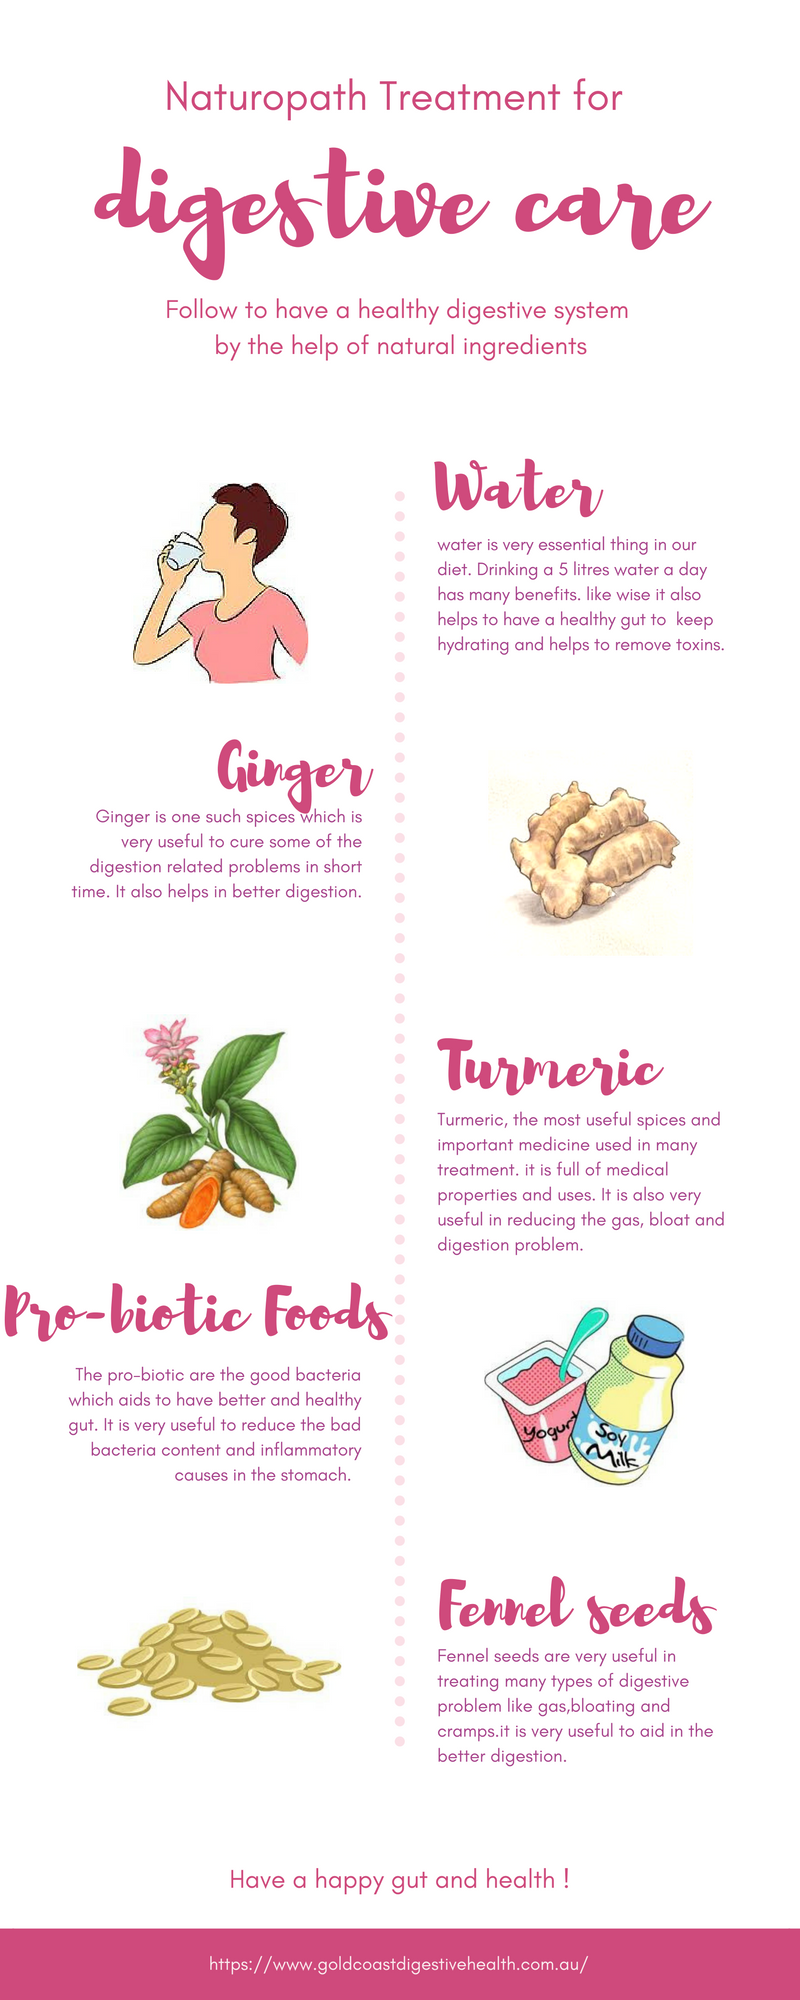 naturopath-the-natural-way-to-treat-your-diseases-infographic-plaza